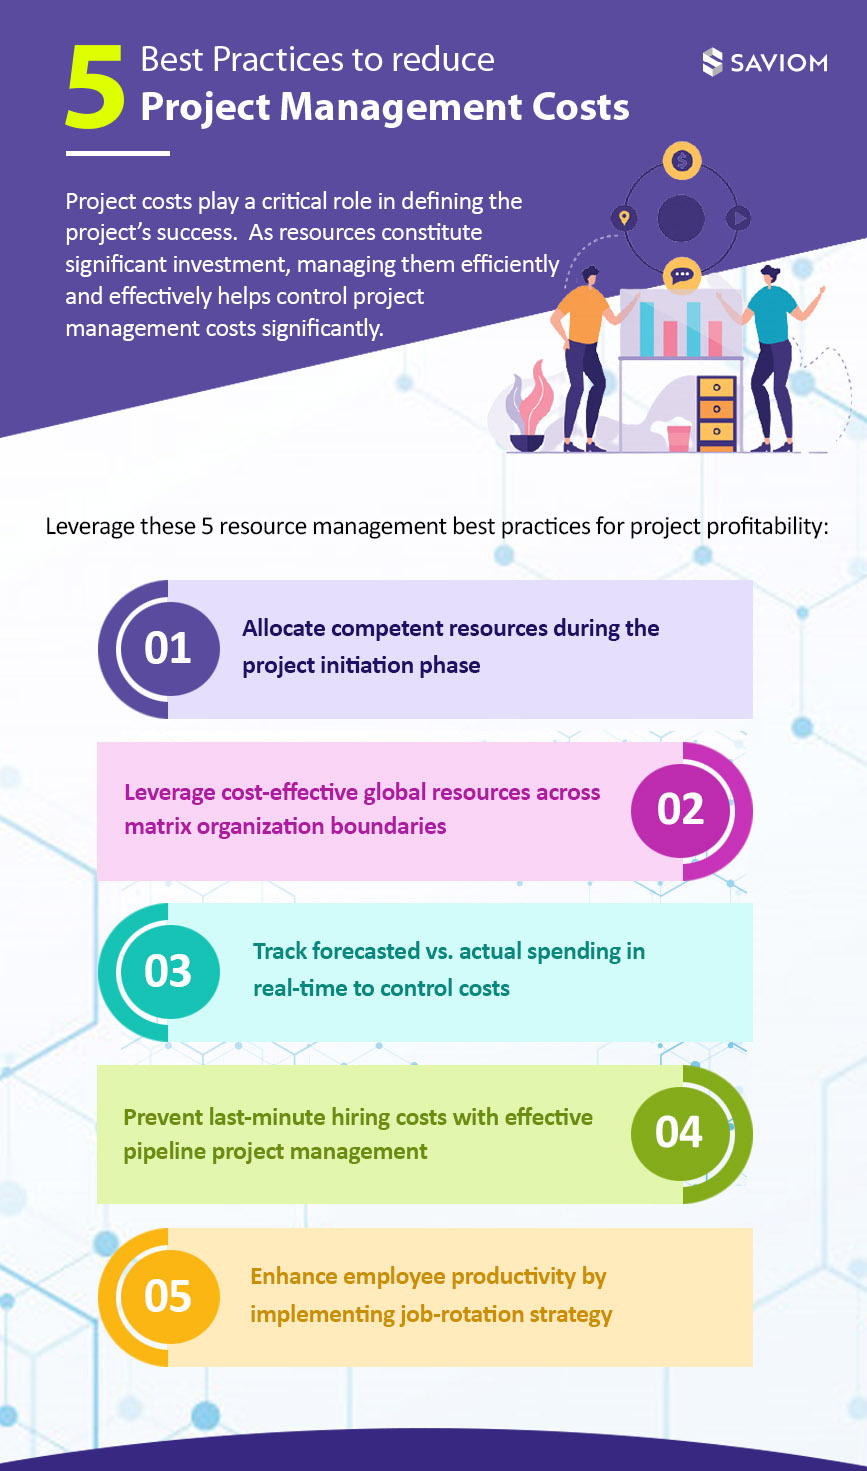 5 Best Practices to Reduce Project Management Costs